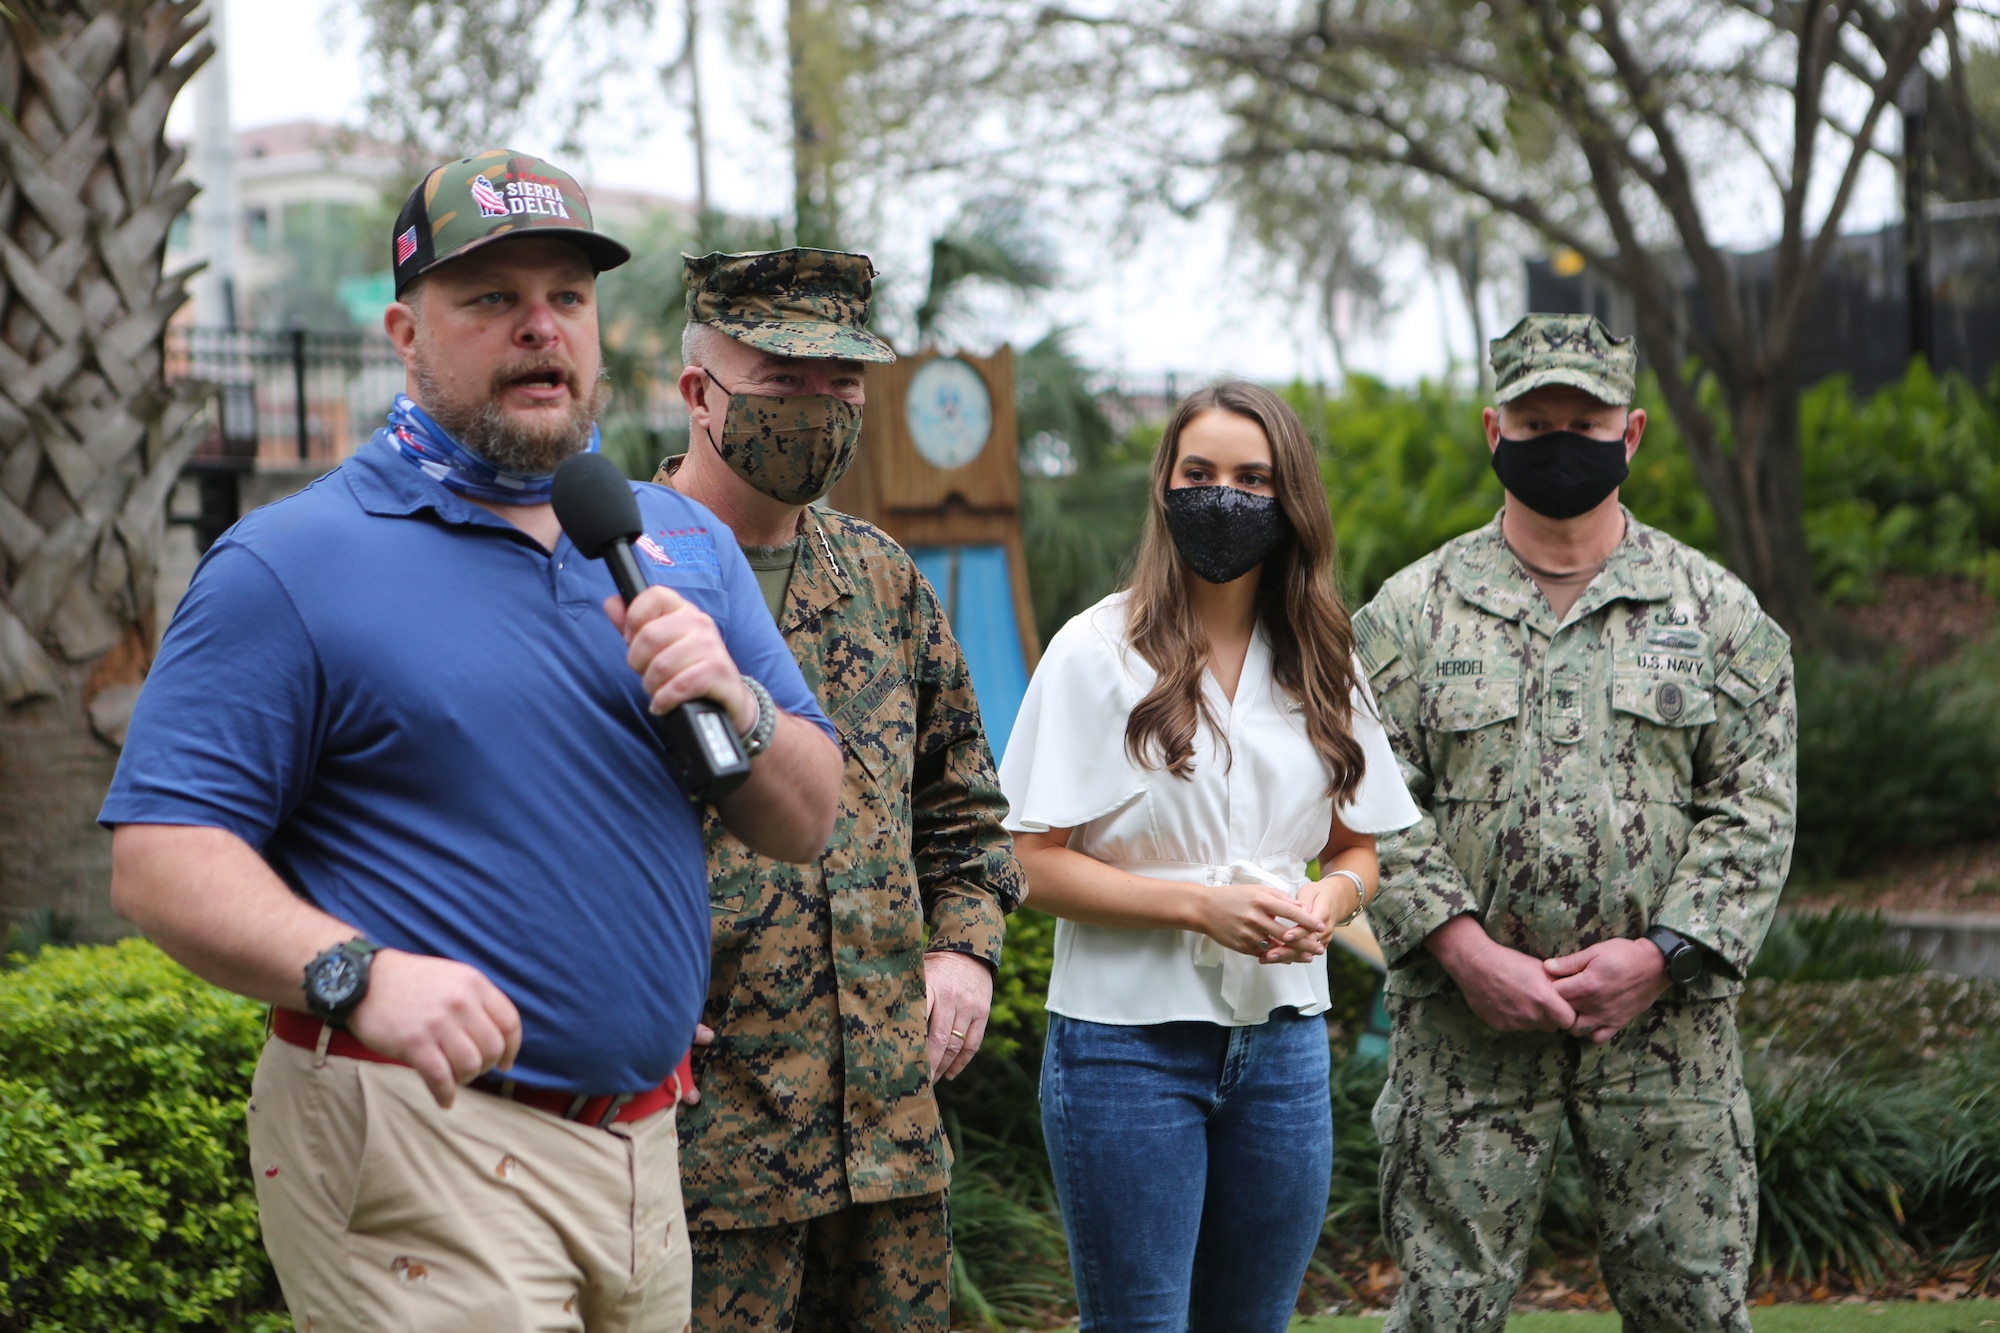 BJ Ganem, founder and CEO of Sierra Delta, a nonprofit aimed at connecting veterans with service dog training, addresses attendees during the ‘Salute-To-Service-Stroll’ Feb. 6, 2021, at the Tampa Riverwalk, Tampa, Florida. Ganem served nearly a decade in the Marine Corps before he was injured in Iraq in 2004, where he lost one of his legs. (U.S. Army photo by Spc. Robert Vicens)